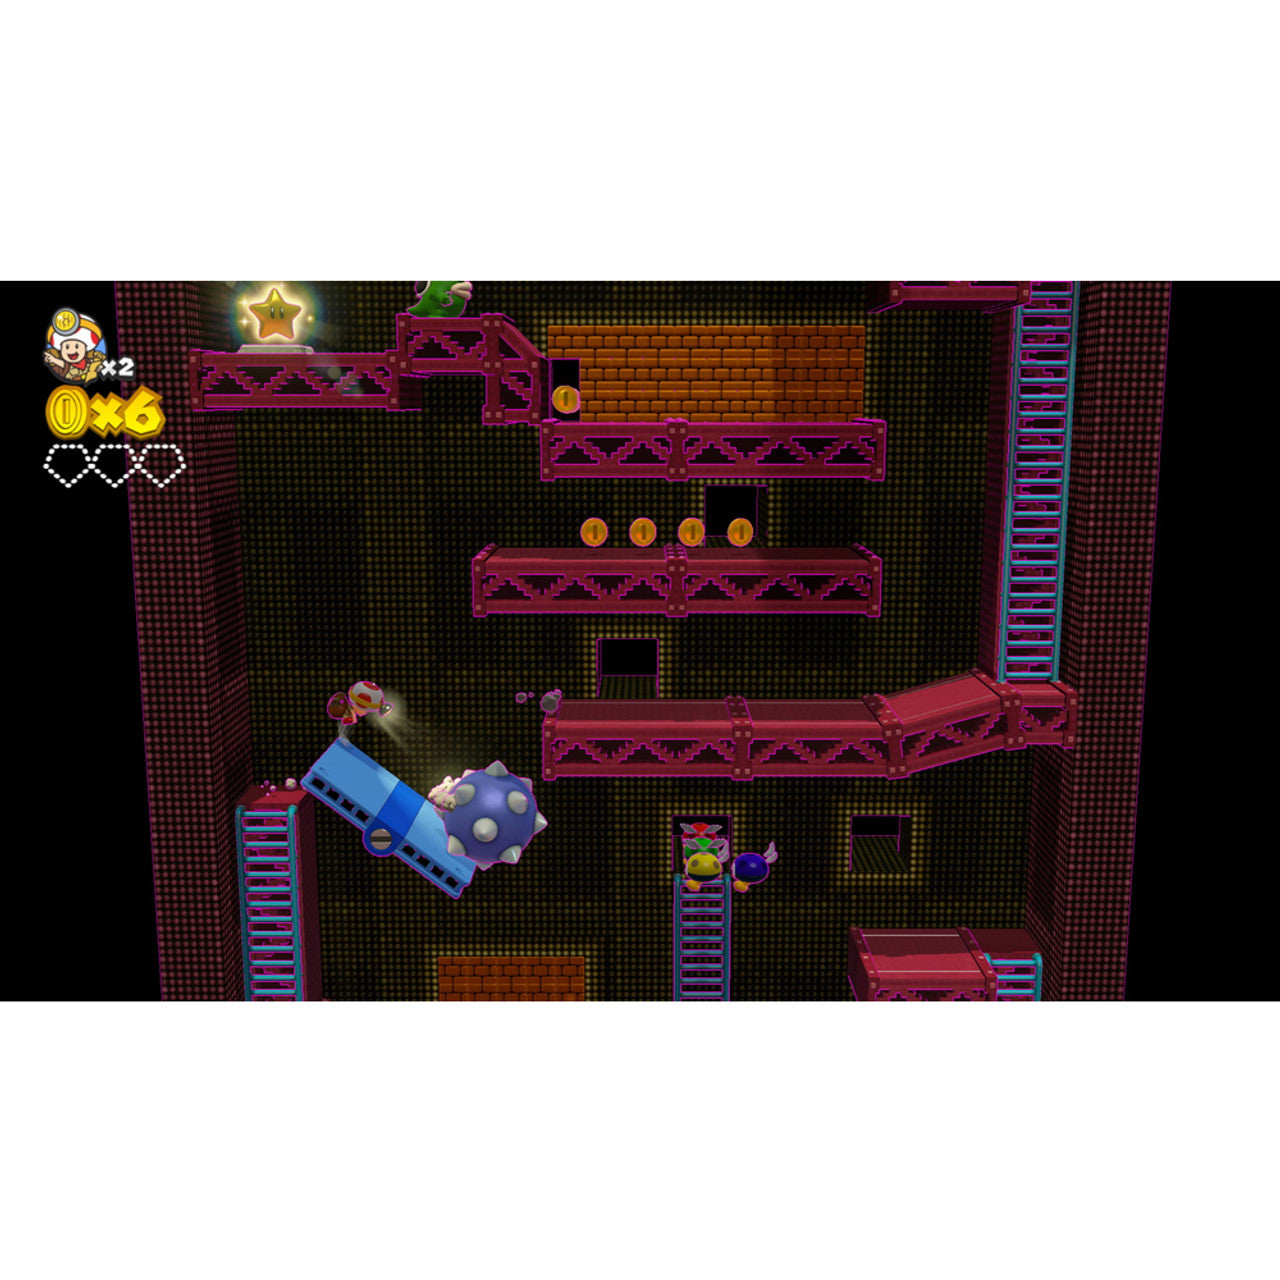 Product Image : This is brand new.<br>Ready for adventure? Captain Toad stars in his own puzzling quest through maze-like mini-universes! Each stage is stacked with tricks and traps, so our stubby hero will have to use his wits to dodge dangers and track those treasures. Survive smoldering volcanoes, hazardous steam engines, haunted houses, and more—all in the name of treasure!

That’s Captain Toad’s mission in life—to hunt juicy valuables like Super Gems and Power Stars across puzzling microcosms of danger